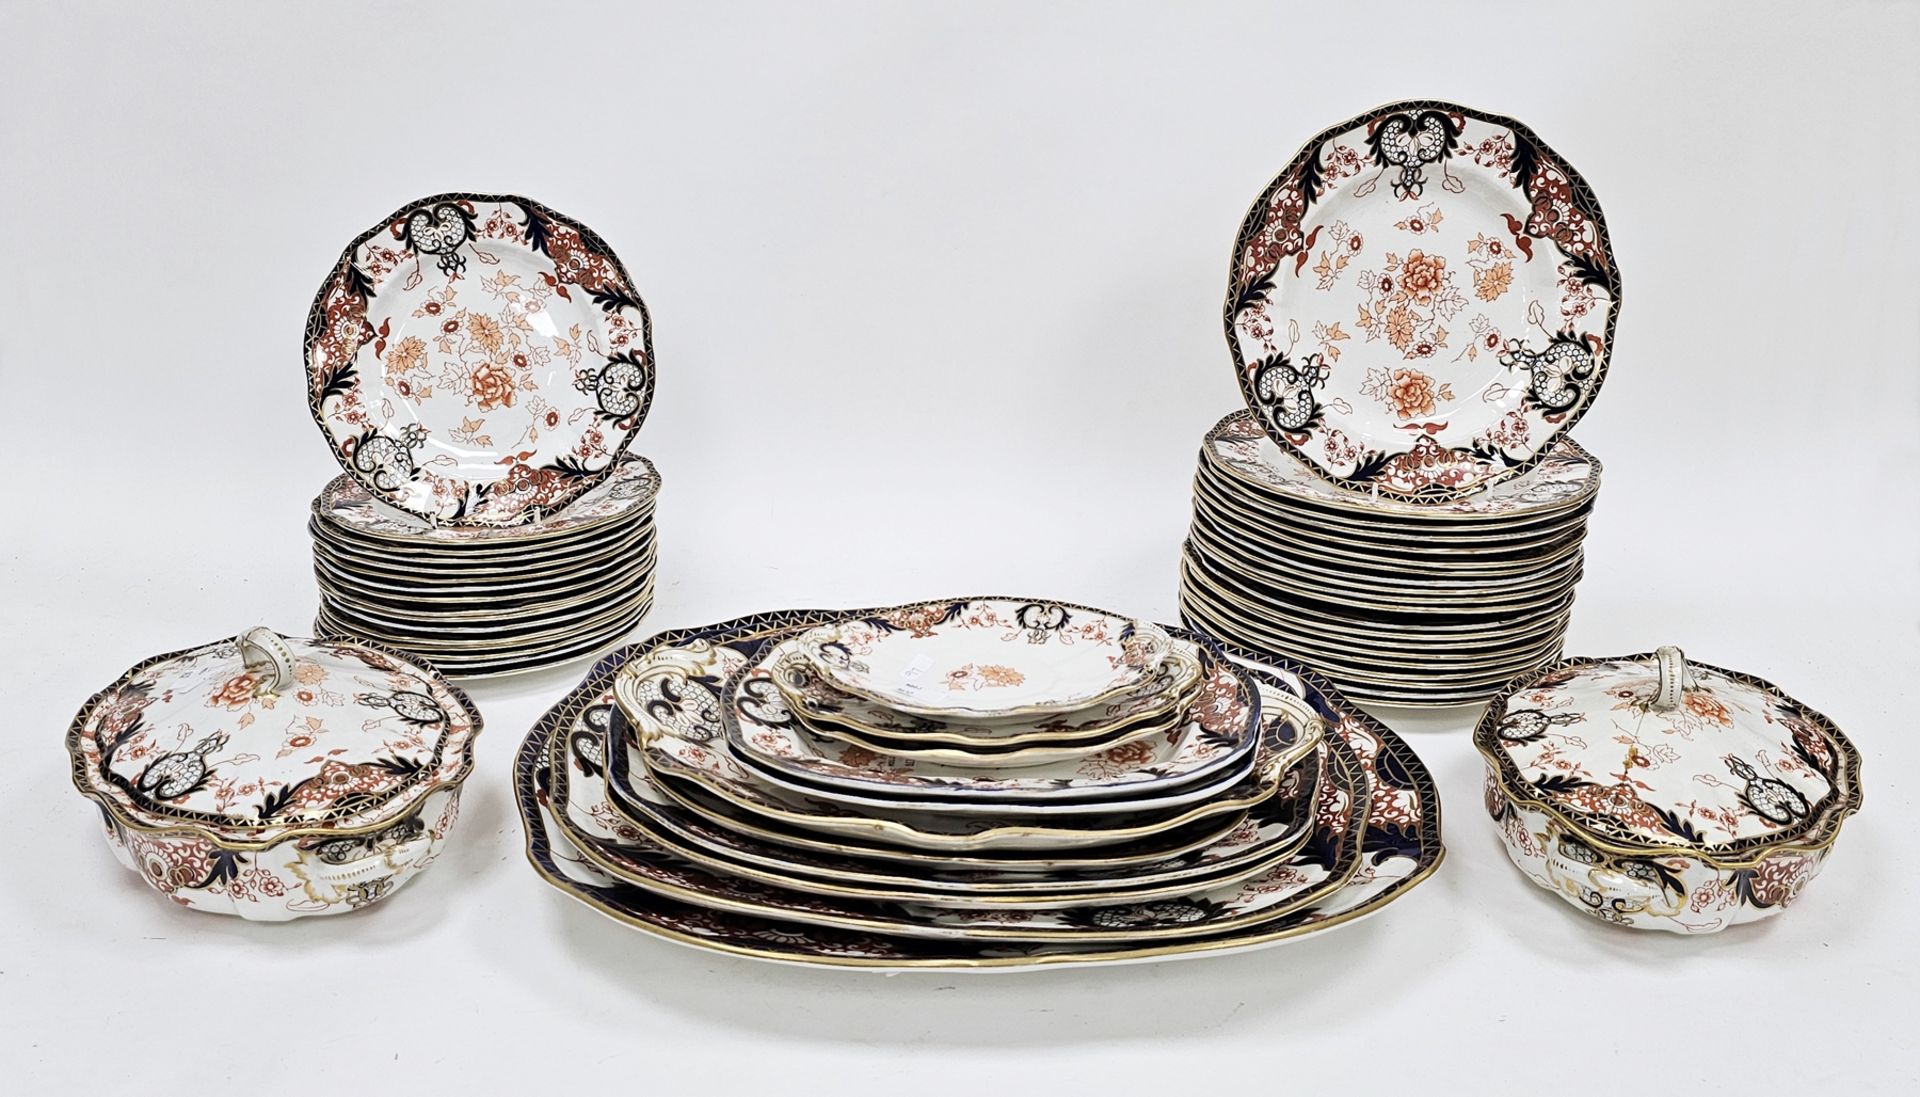 Composite Royal Crown Derby imari pattern part dinner and tea service, circa 1890, printed green